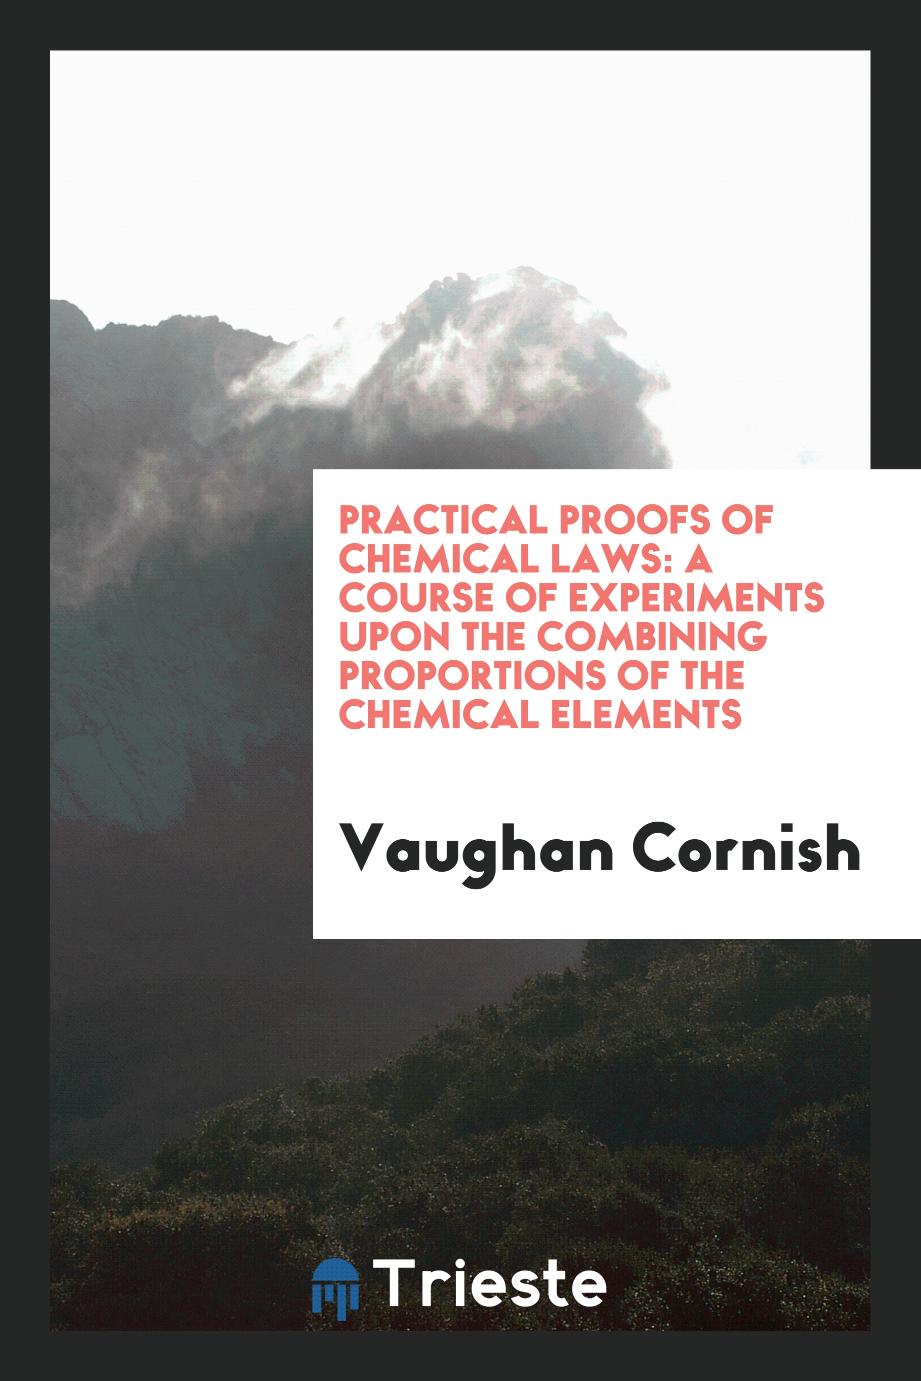 Practical Proofs of Chemical Laws: A Course of Experiments upon the Combining Proportions of the Chemical Elements